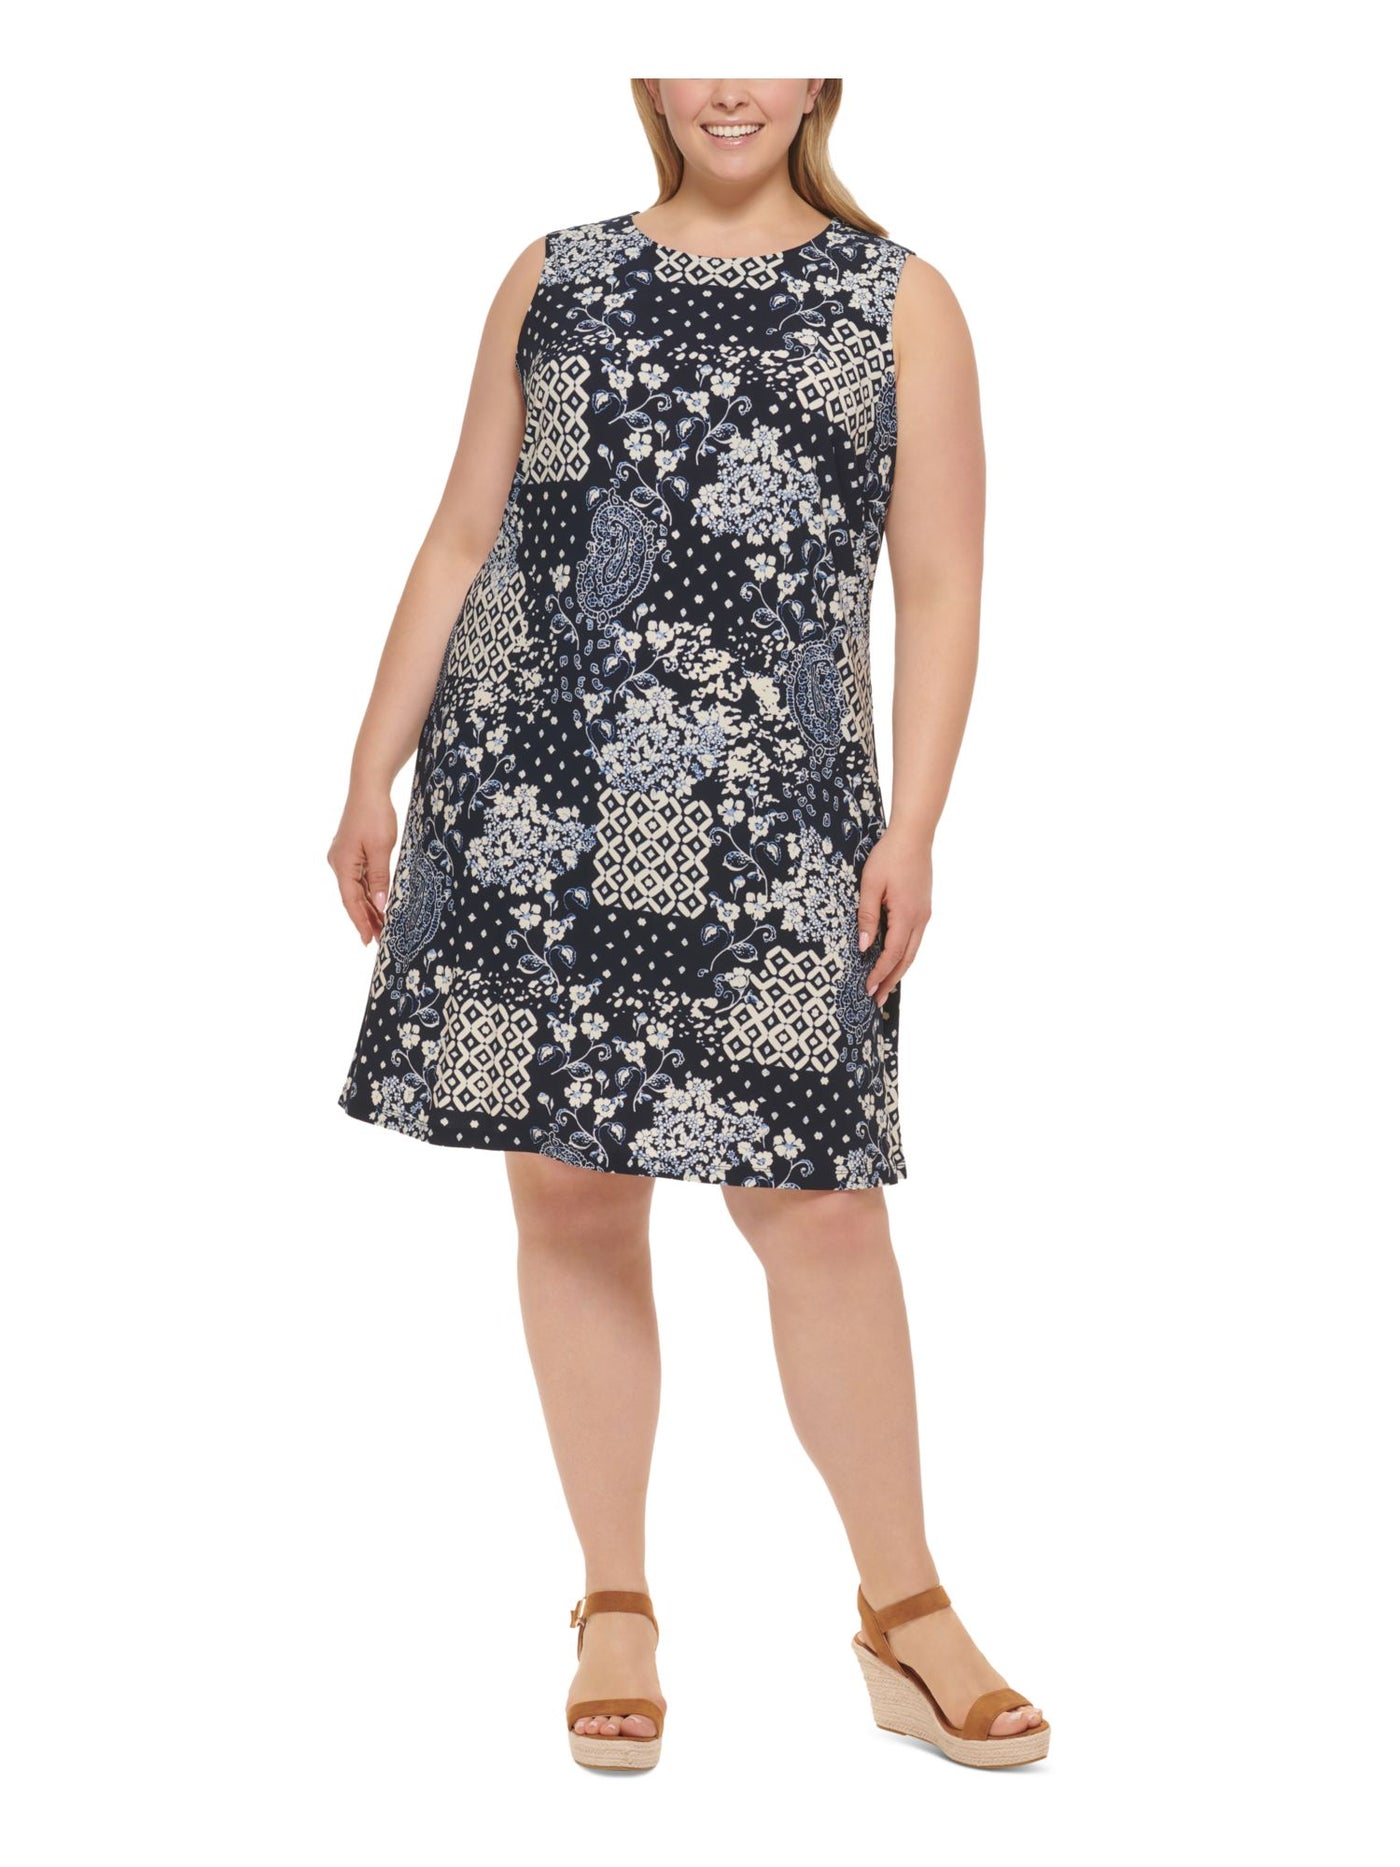 TOMMY HILFIGER Womens Navy Printed Sleeveless Round Neck Above The Knee Shift Dress Plus 16W